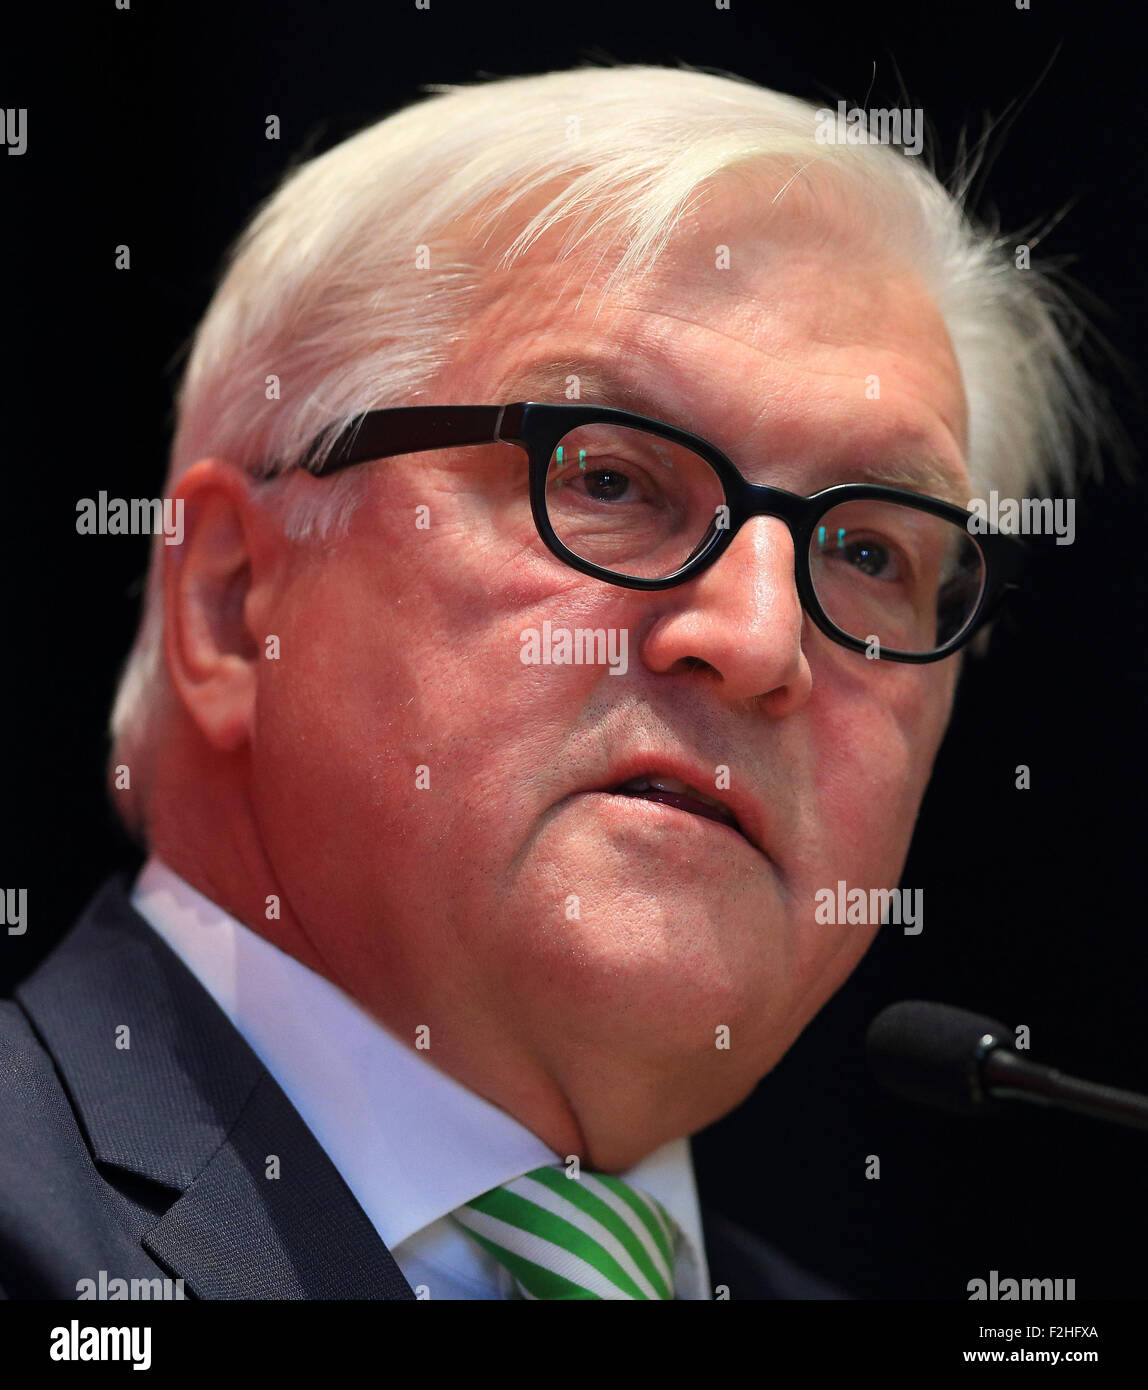 Magdeburg, Germany. 19th Sep, 2015. German Foreign Minister Frank-Walter Steinmeier speaks during a Saxony-Anhalt state convention of German party SPD at Kulturwerk Fichte in Magdeburg, Germany, 19 September 2015. Photo: Jens Wolf/dpa/Alamy Live News Stock Photo